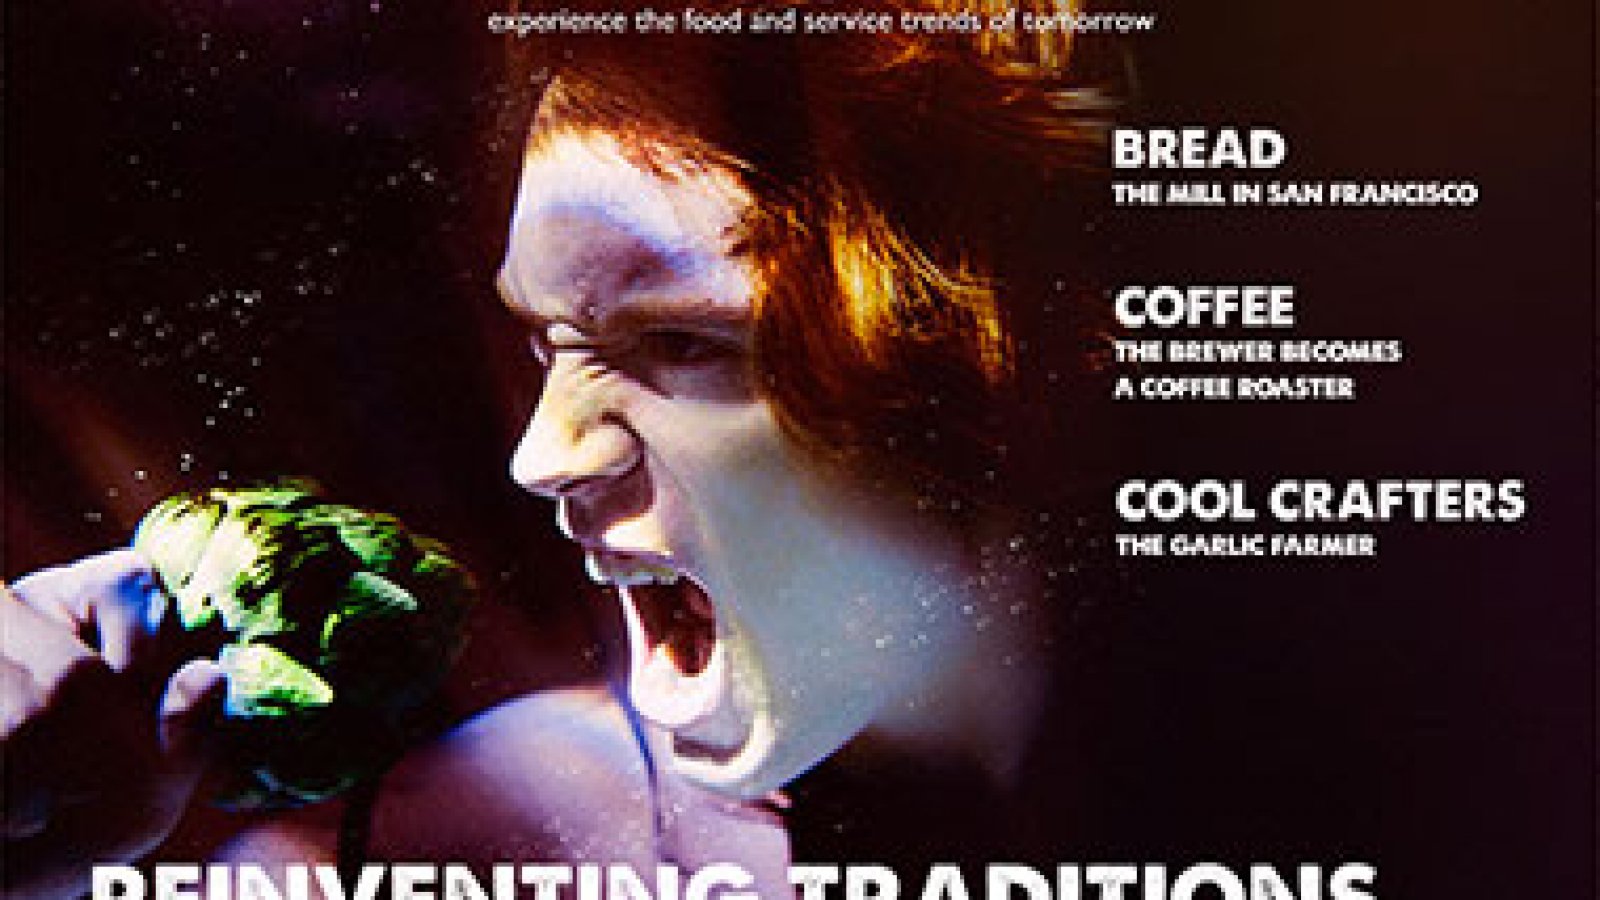 New magazine:  Reinventing traditions